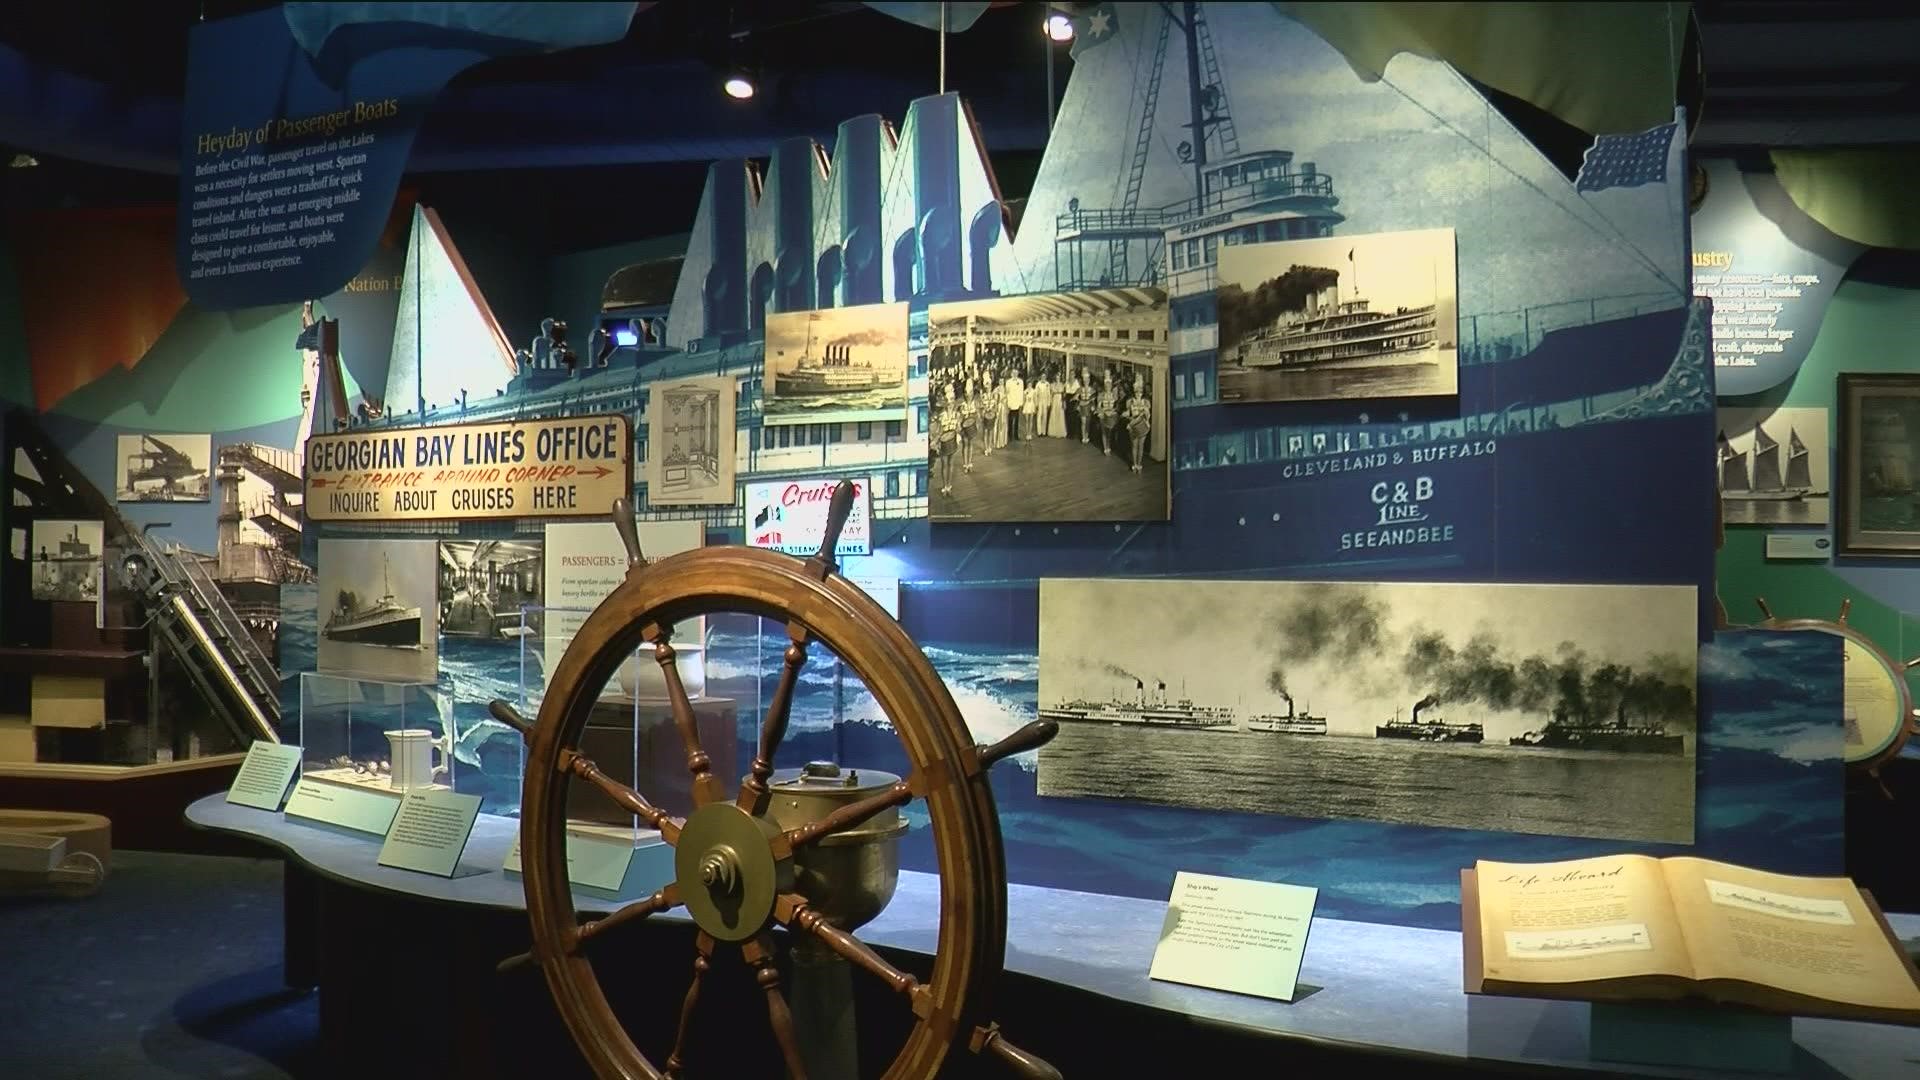 The east Toledo museum will continue its annual tradition of a free admission weekend, this year from 10 a.m. to 5 p.m. from Saturday to Monday.